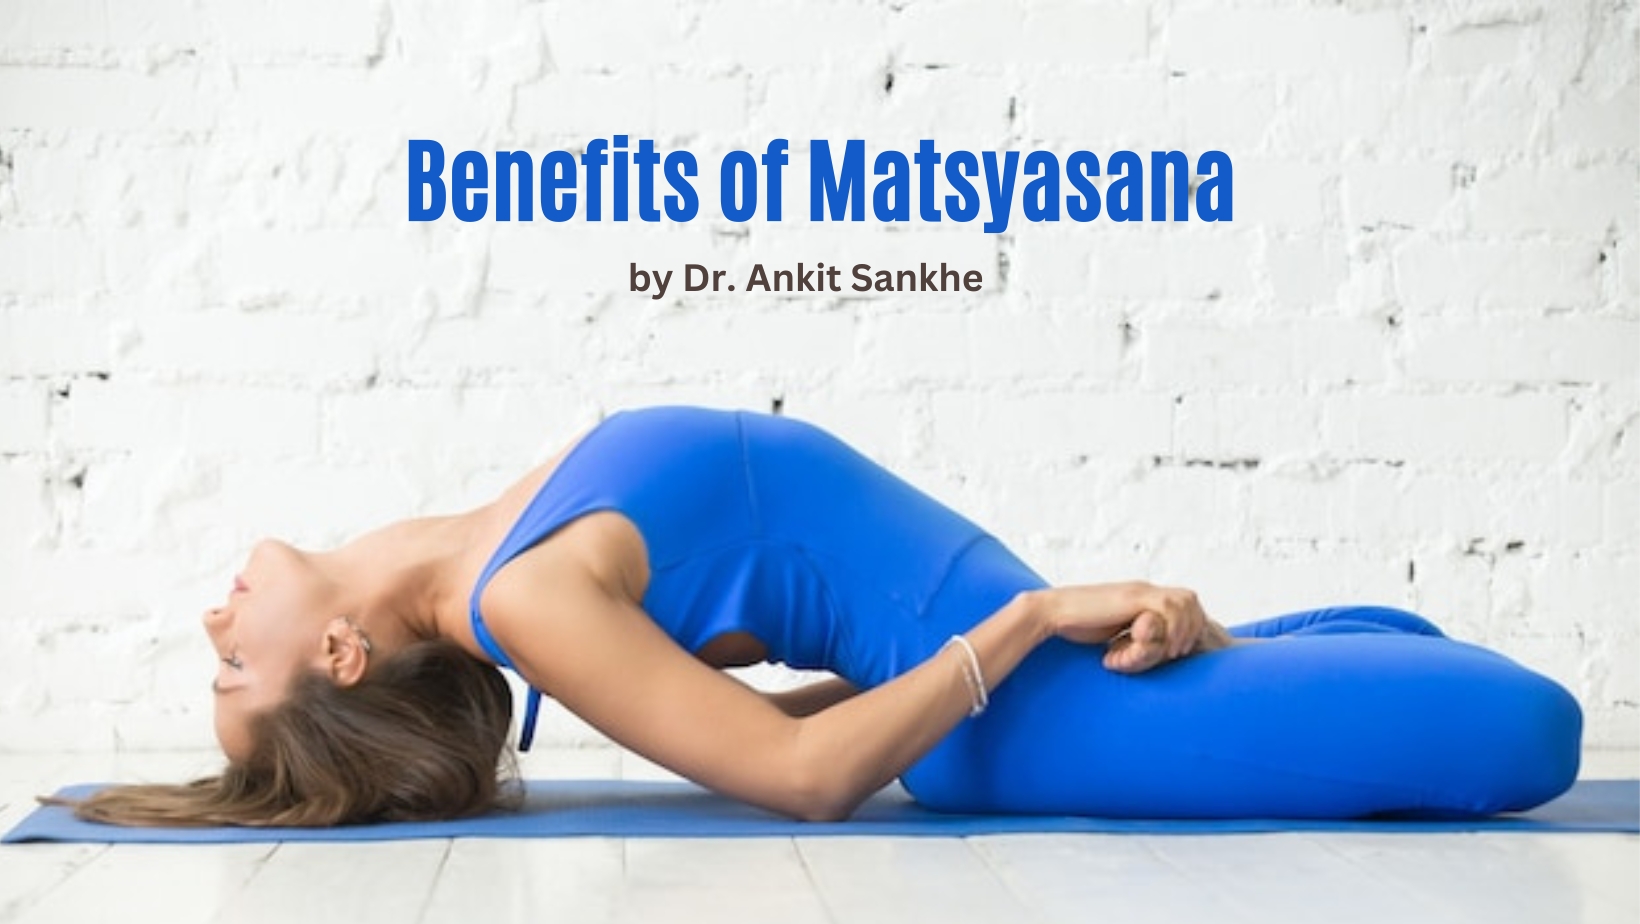 Yoga Asanas You Can Do Every Day to Boost Your Immunity